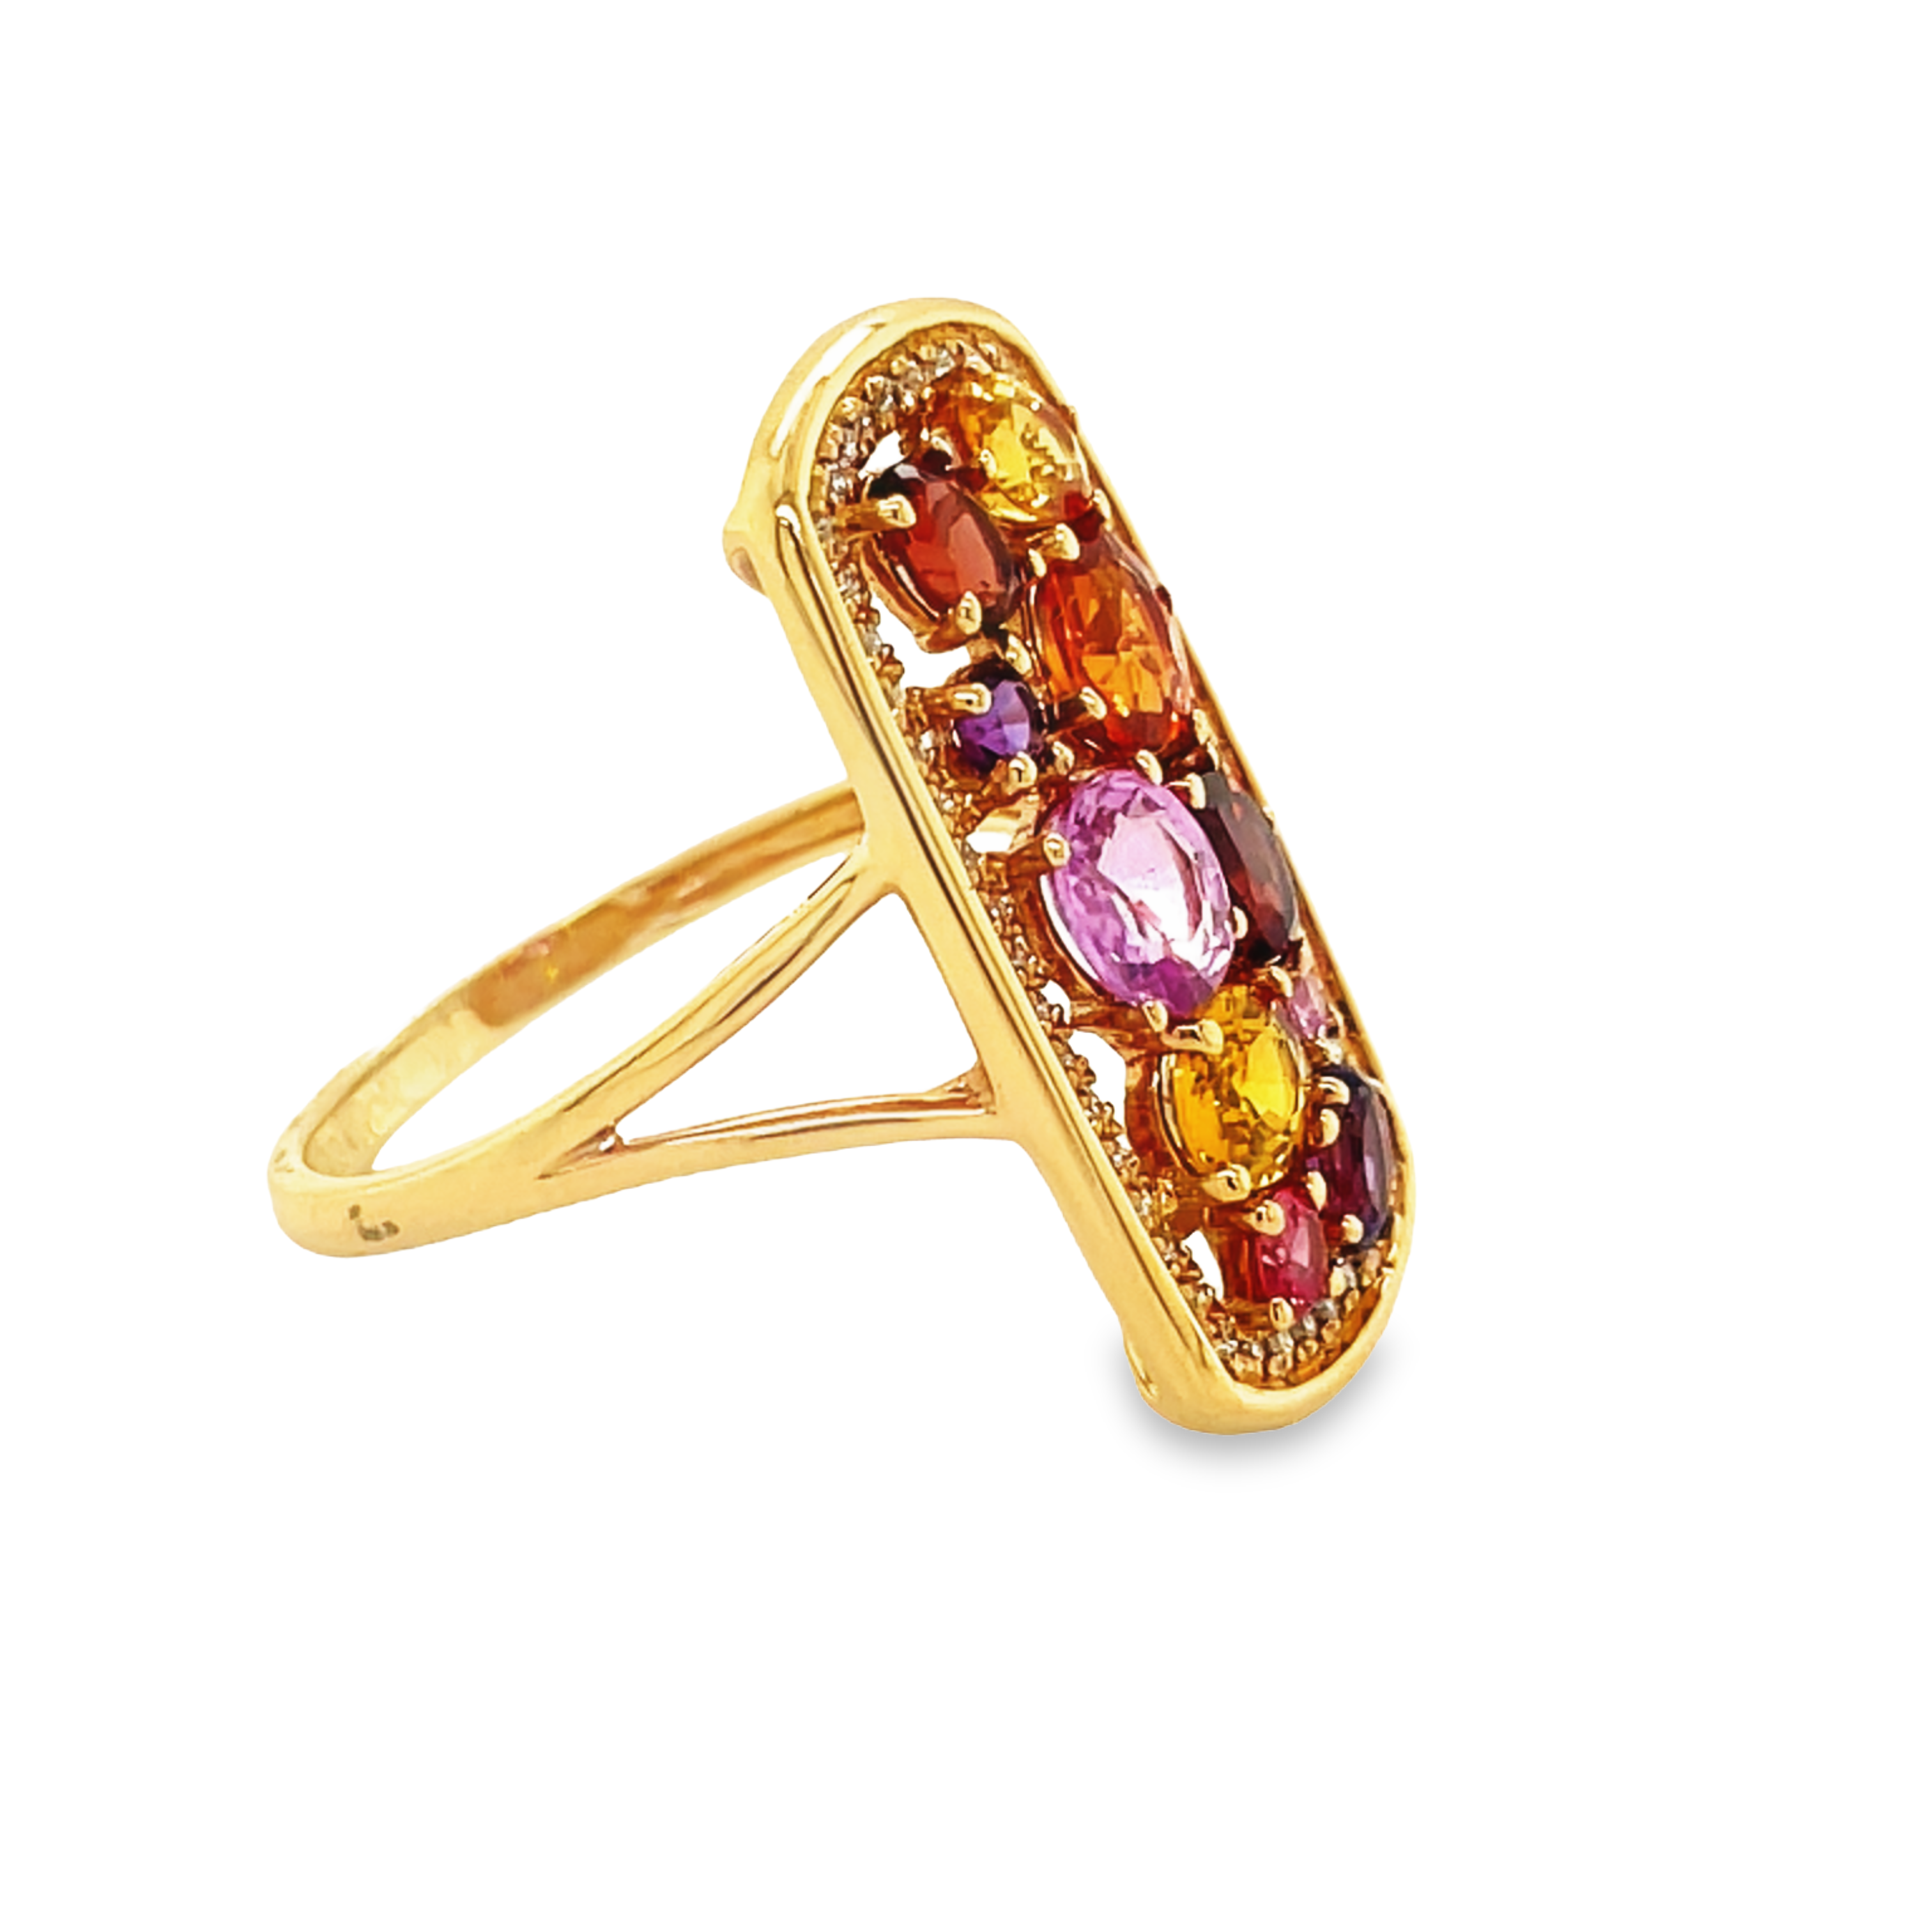 One rectangular fashion ring  24.00 x 12.00 mm   Multicolor sapphires 1.32 cts   Round diamonds 0.15 cts  Set in 18k rose gold  Open shank